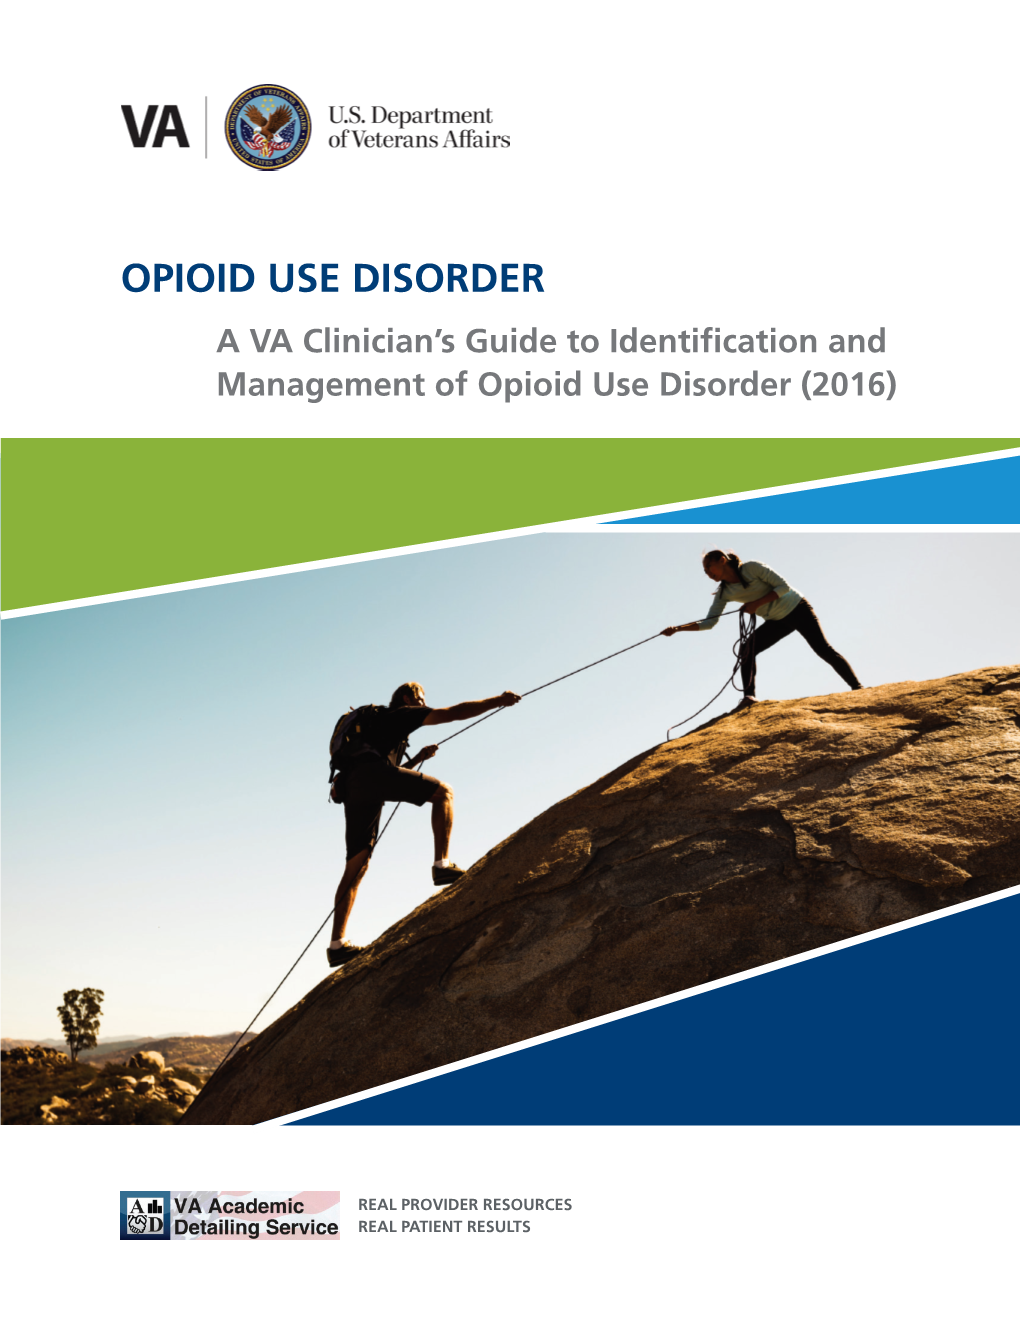 OPIOID USE DISORDER a VA Clinician’S Guide to Identification and Management of Opioid Use Disorder (2016)